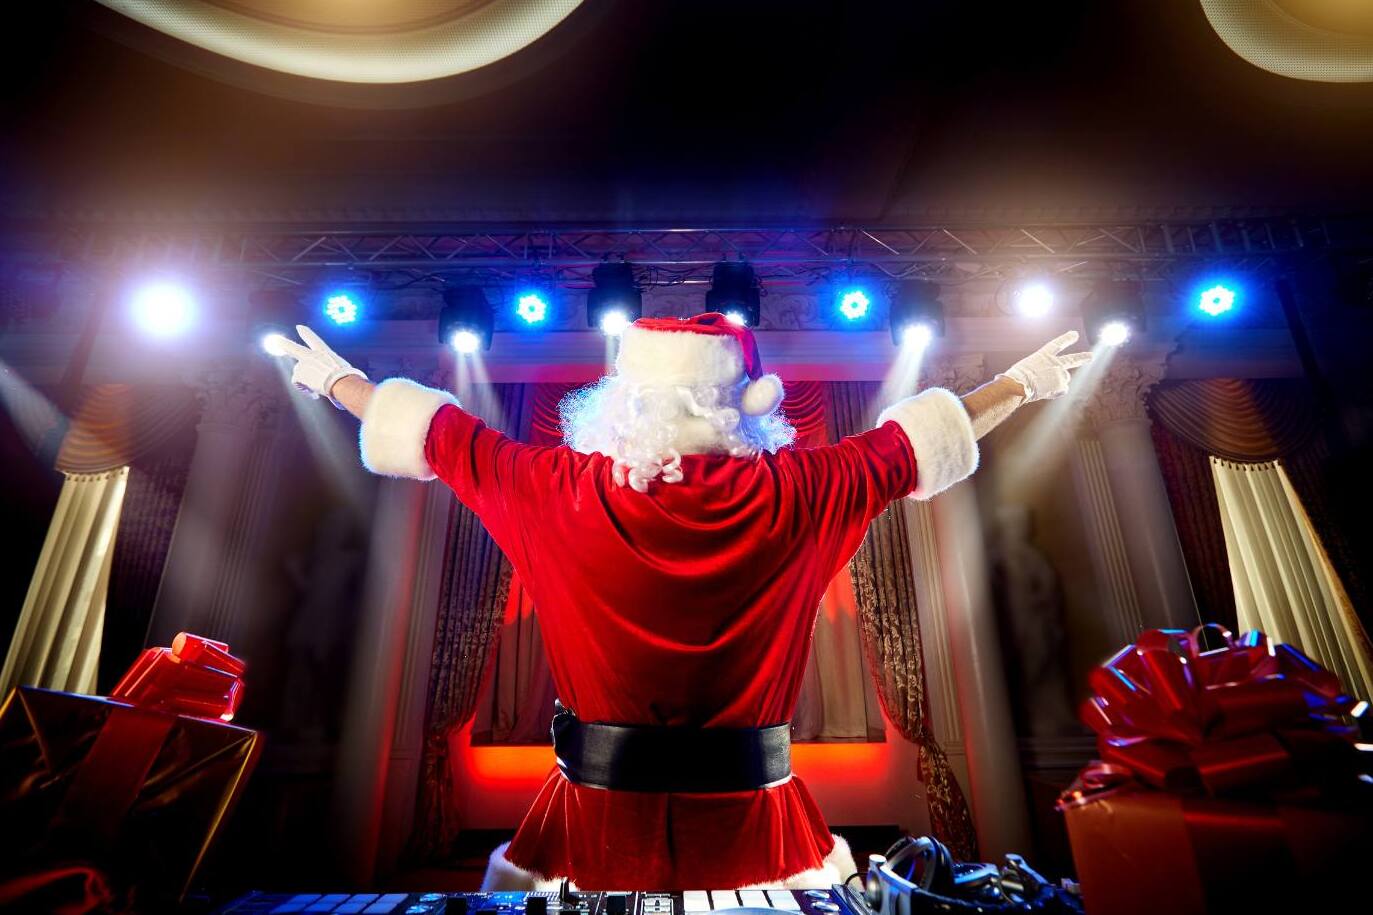 The best playlist for a work Christmas party